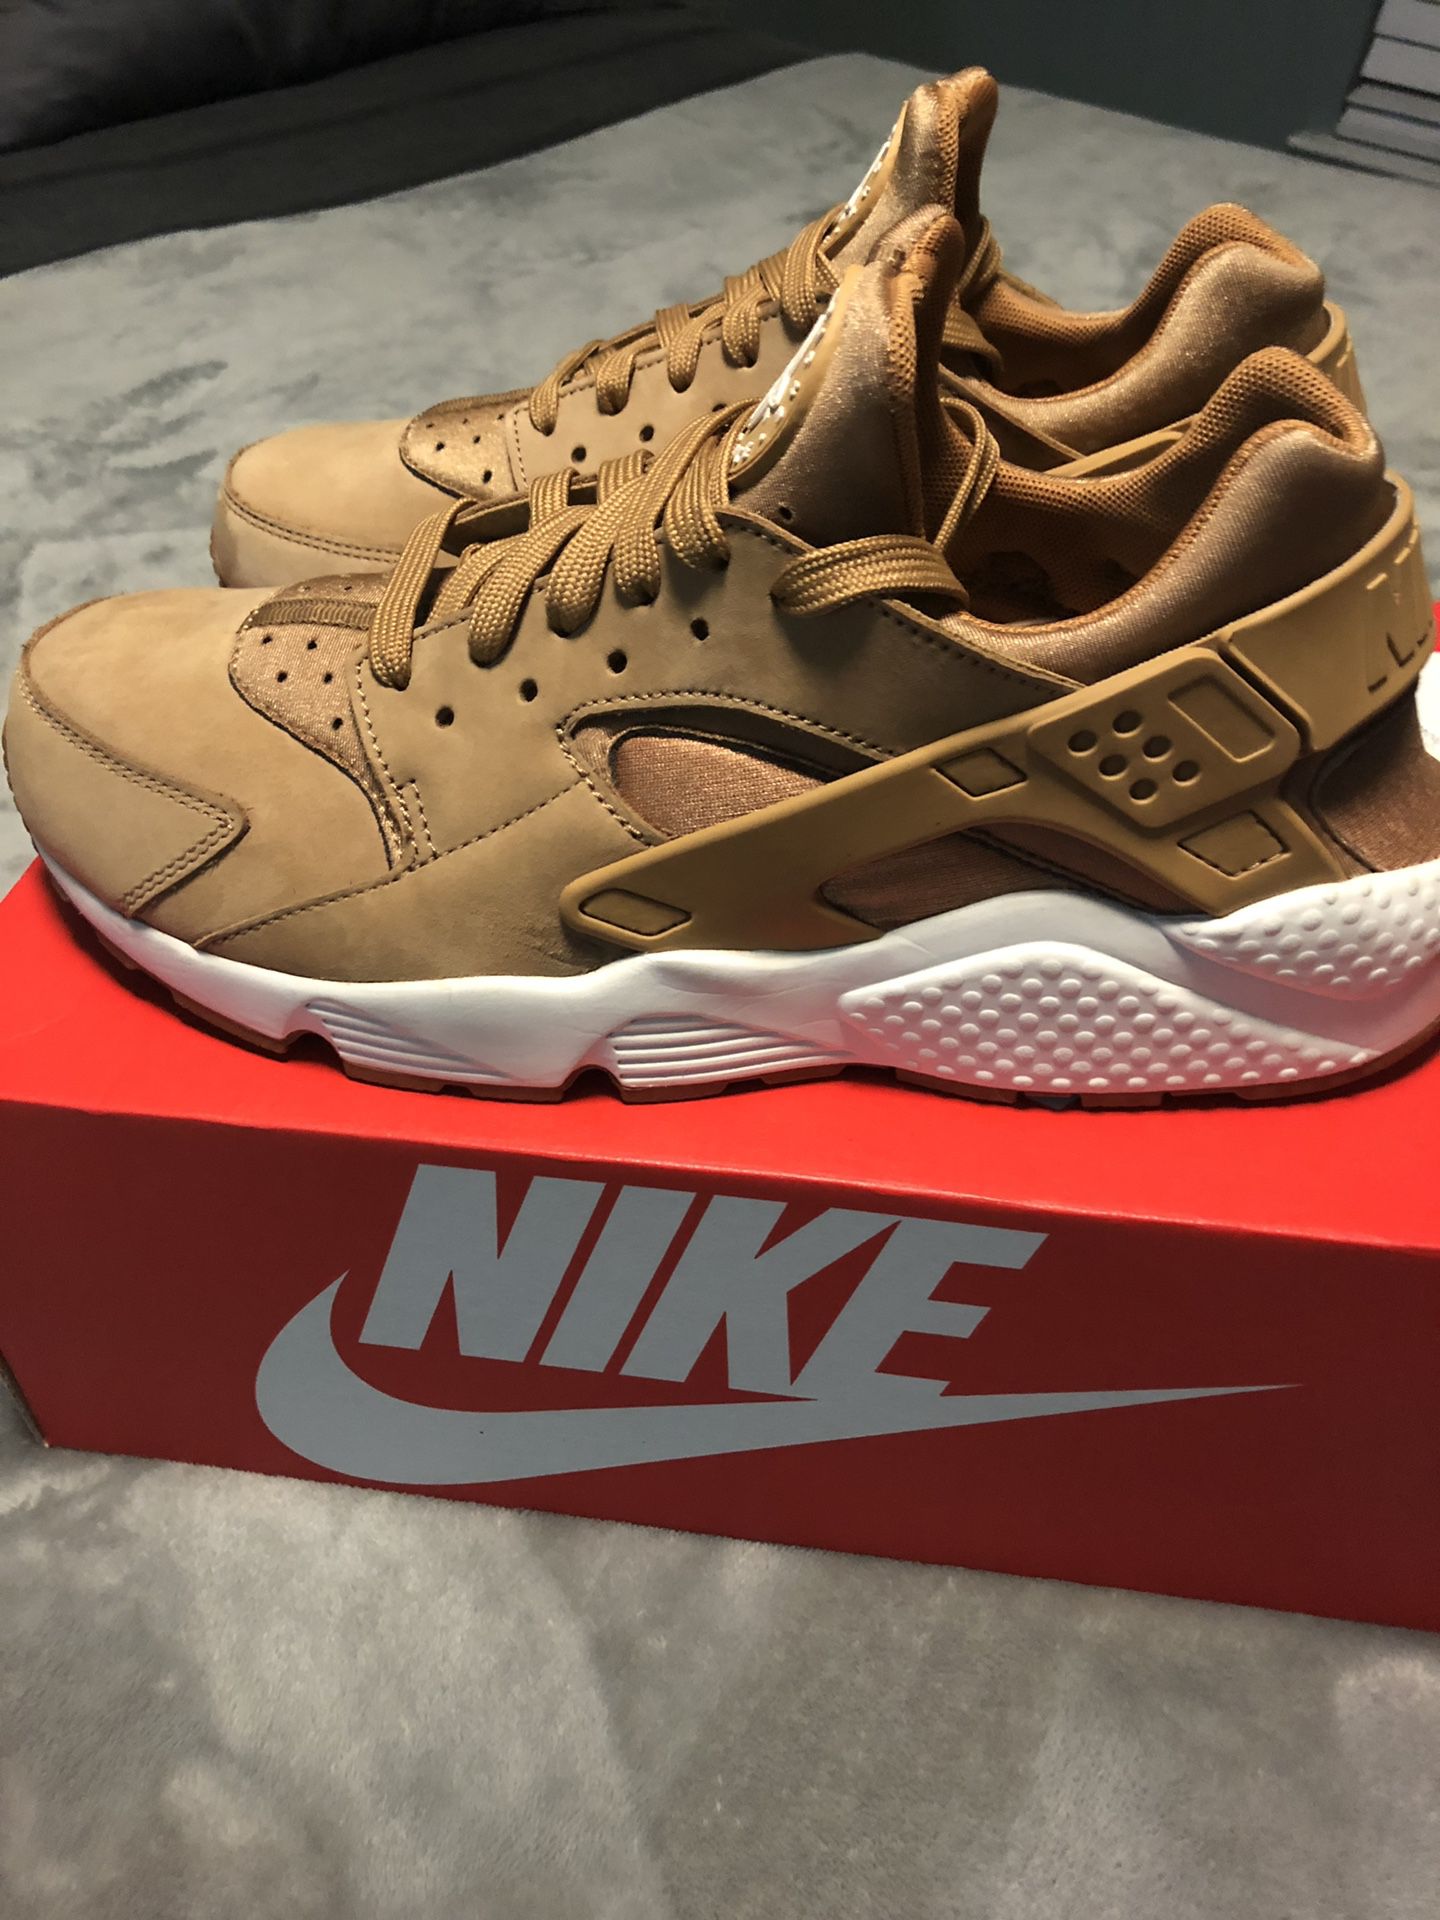 MENS NIKE AIR HUARACHE FLAX WHEAT PACK 318429-202 SIZE 10.5 **NEW**100% AUTHENTIC for Sale in CA - OfferUp